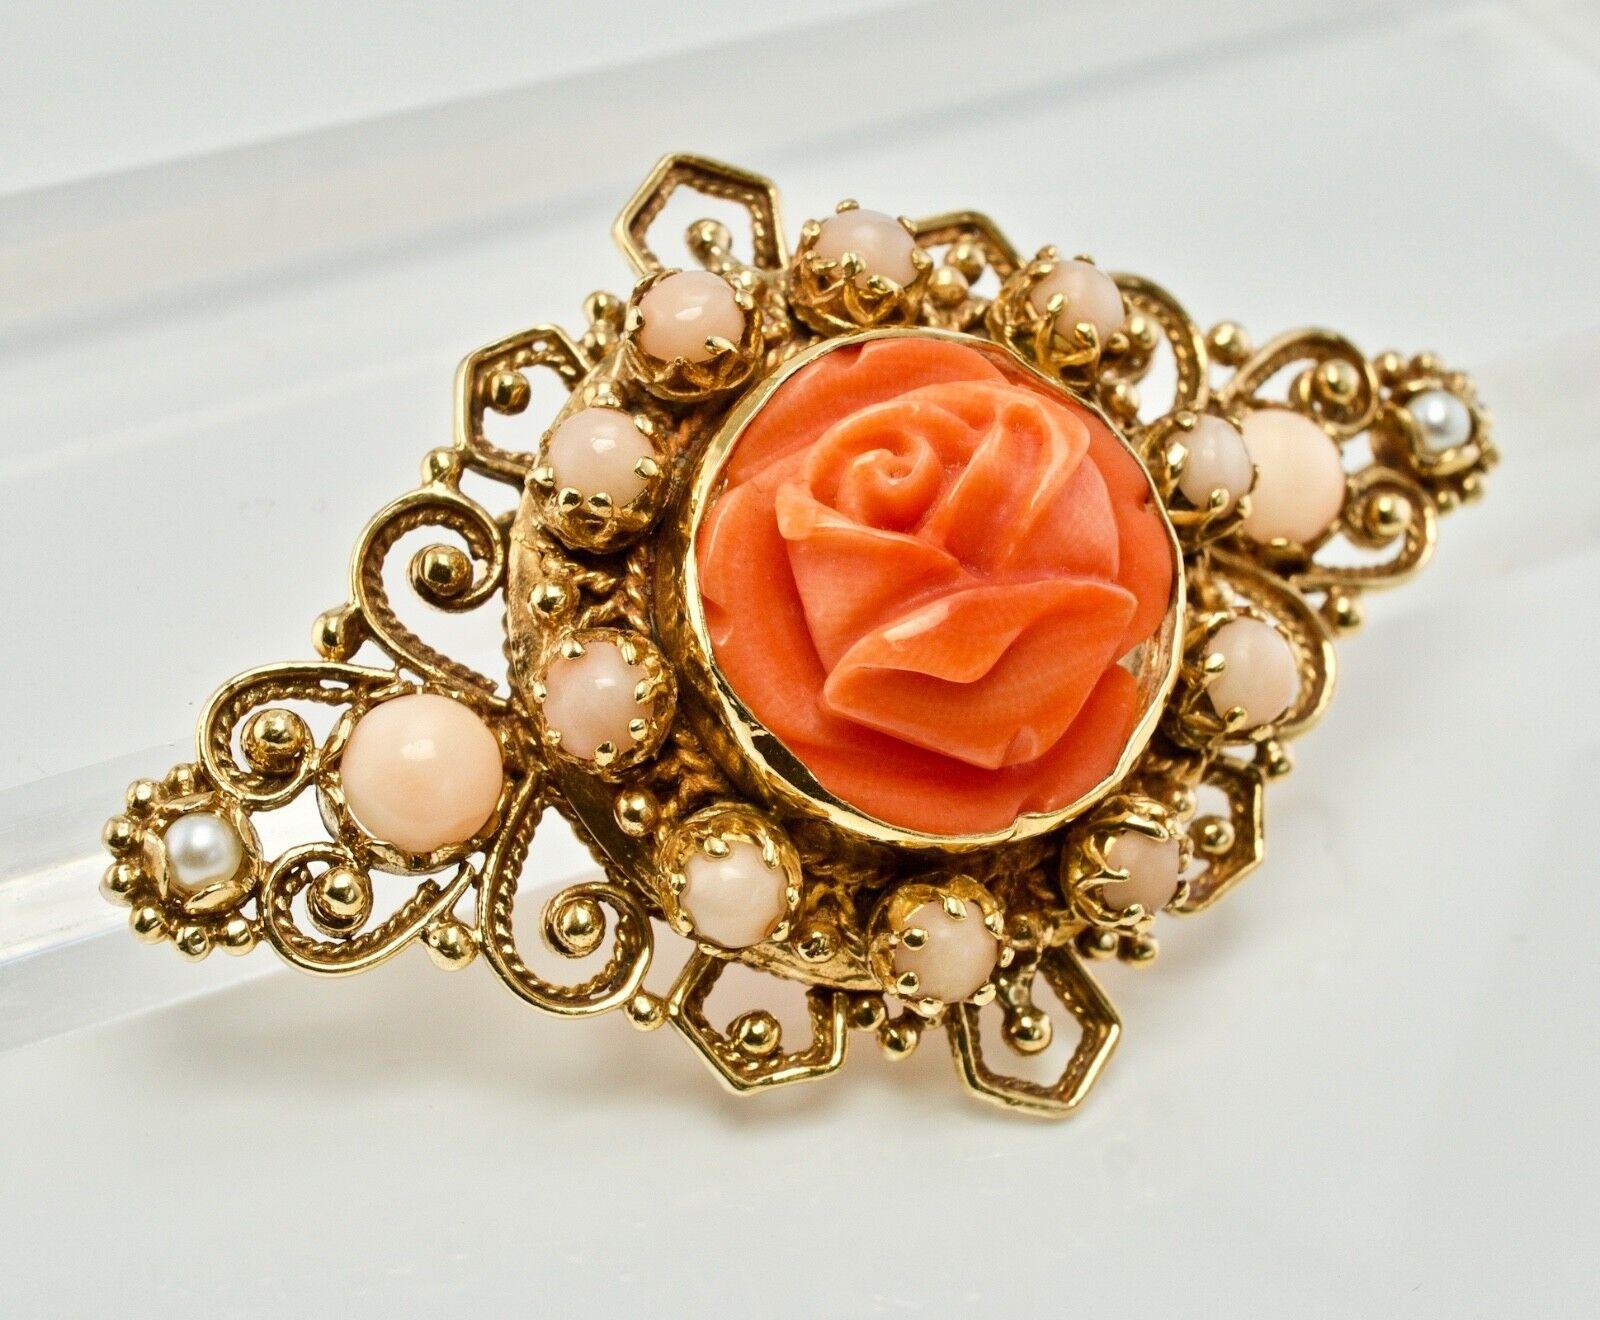 Red Coral Pearl Rose Flower Pendant Brooch 14K Yellow Gold

This gorgeous vintage piece is finely crafted in solid 14K Yellow gold (stamped and also carefully tested and guaranteed). The center beautiful carved coral flower measures 16mm. It is